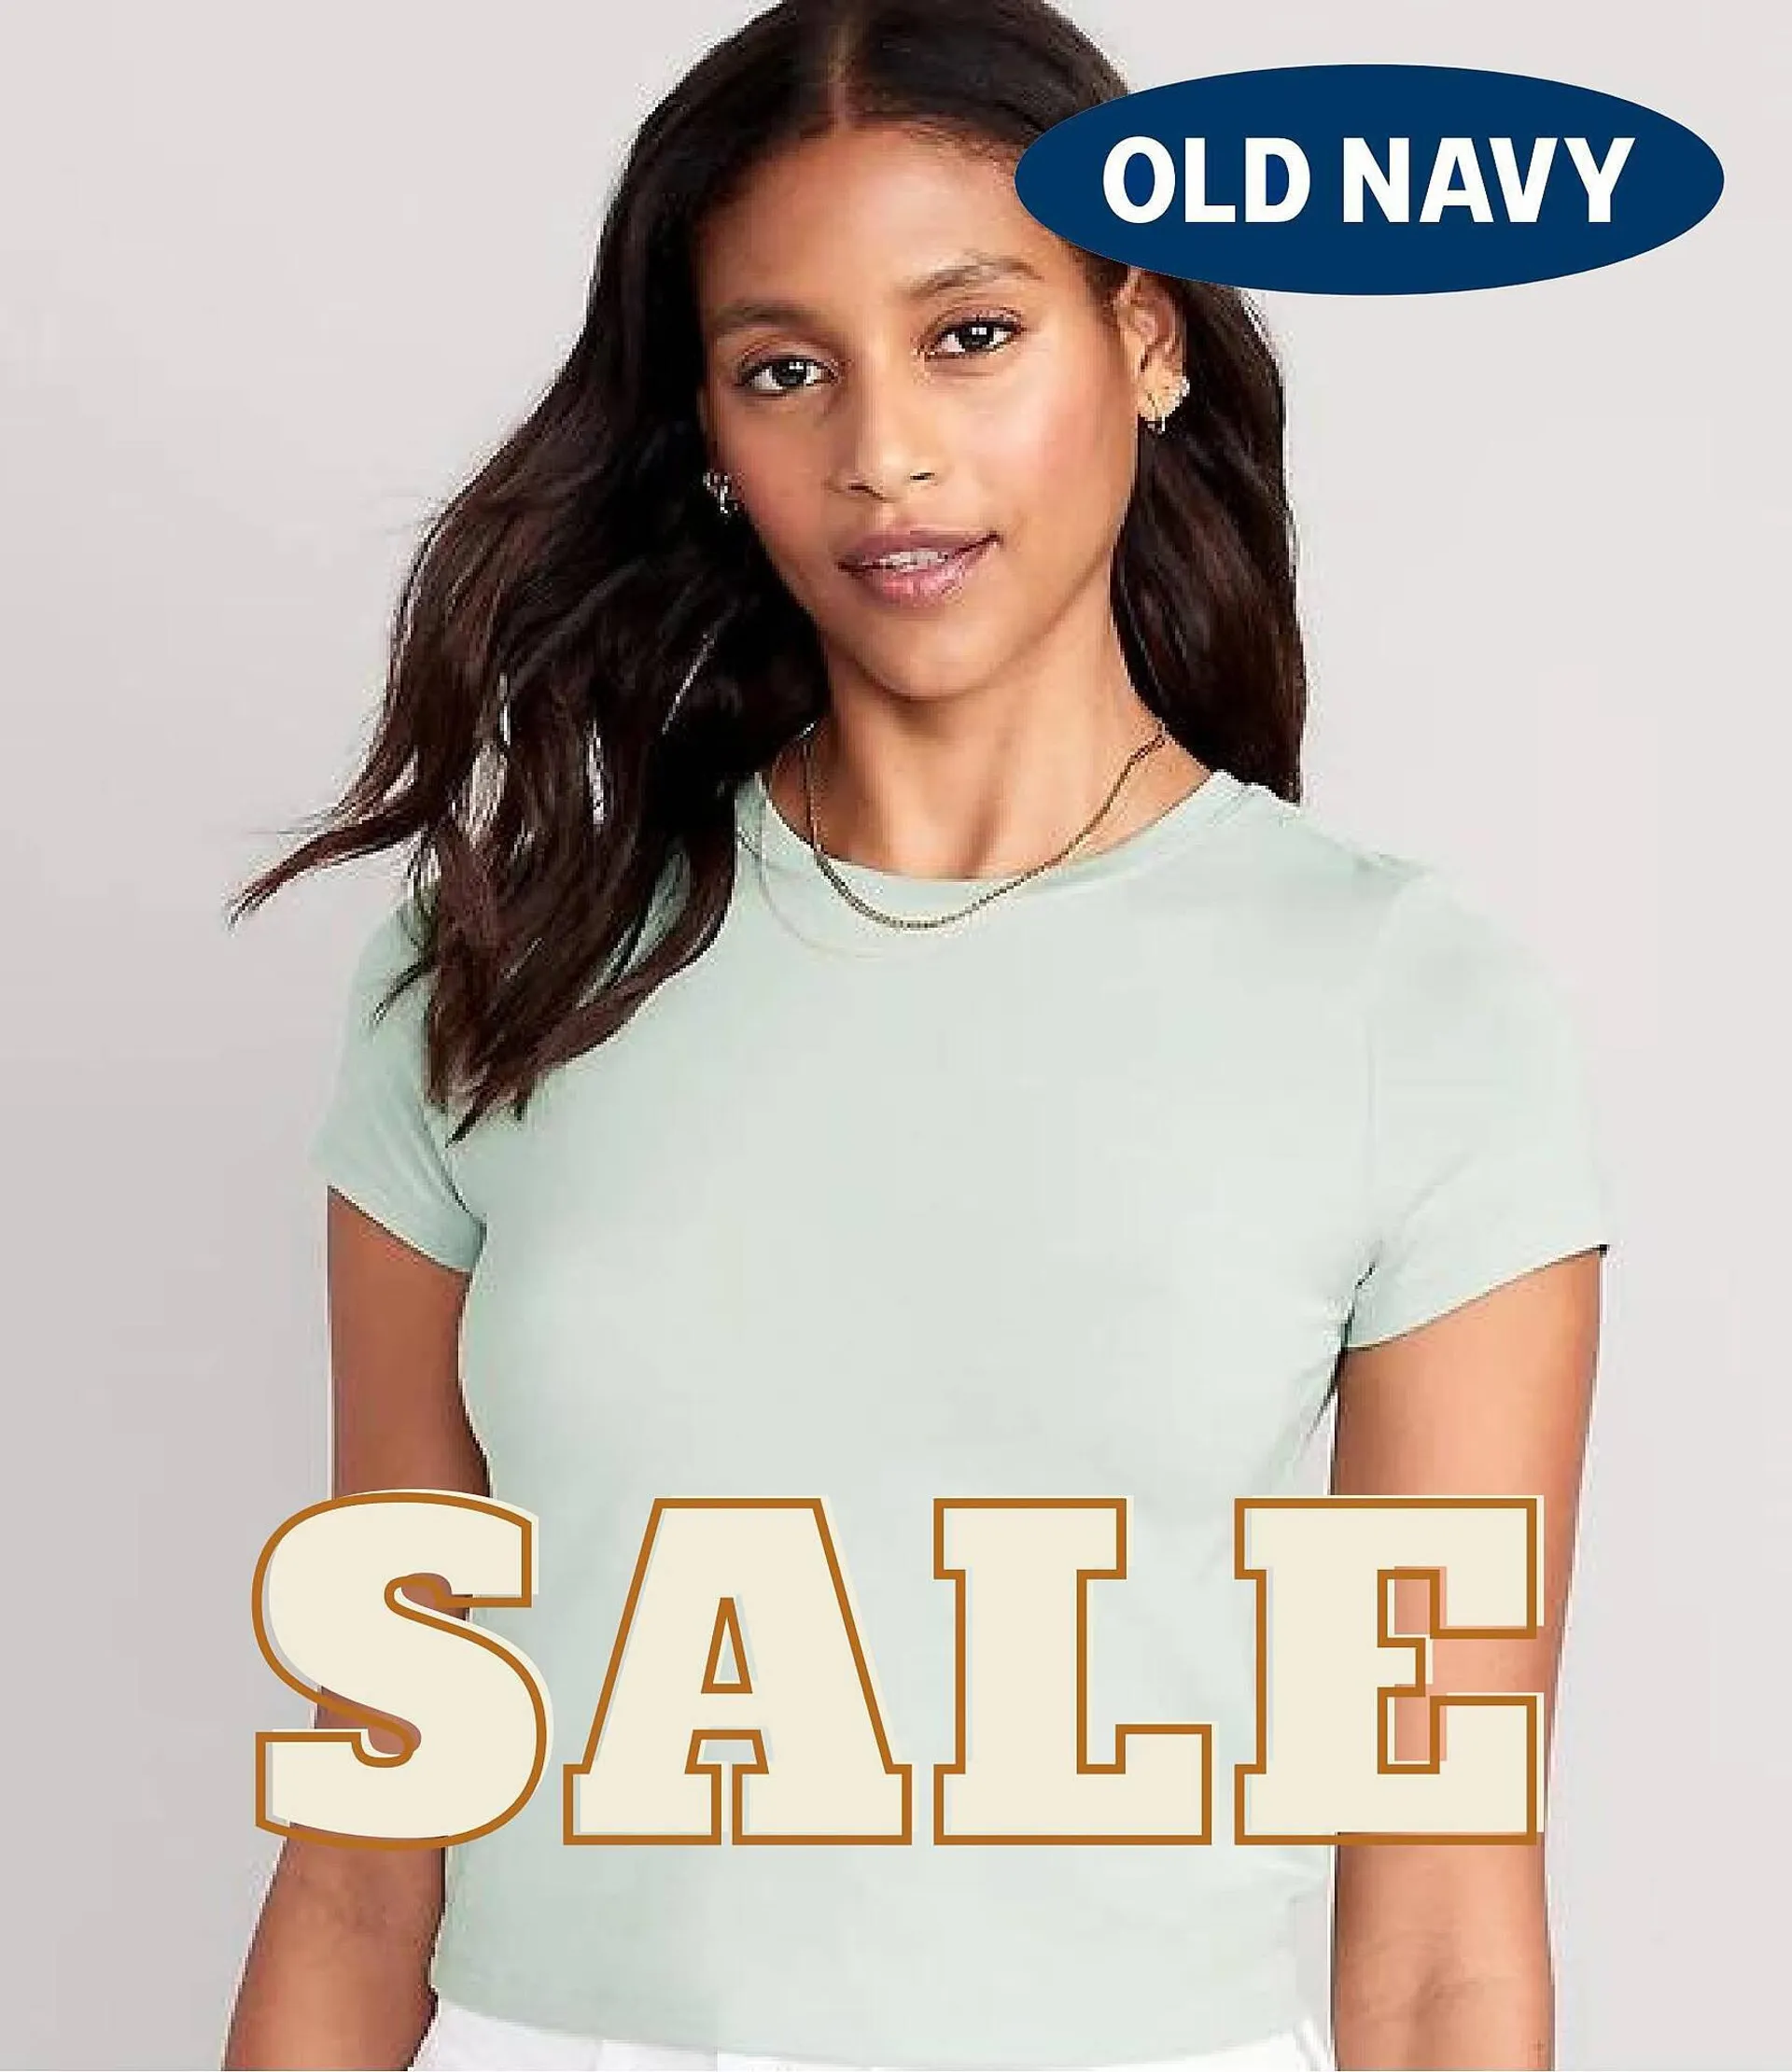 Old Navy ad - 1